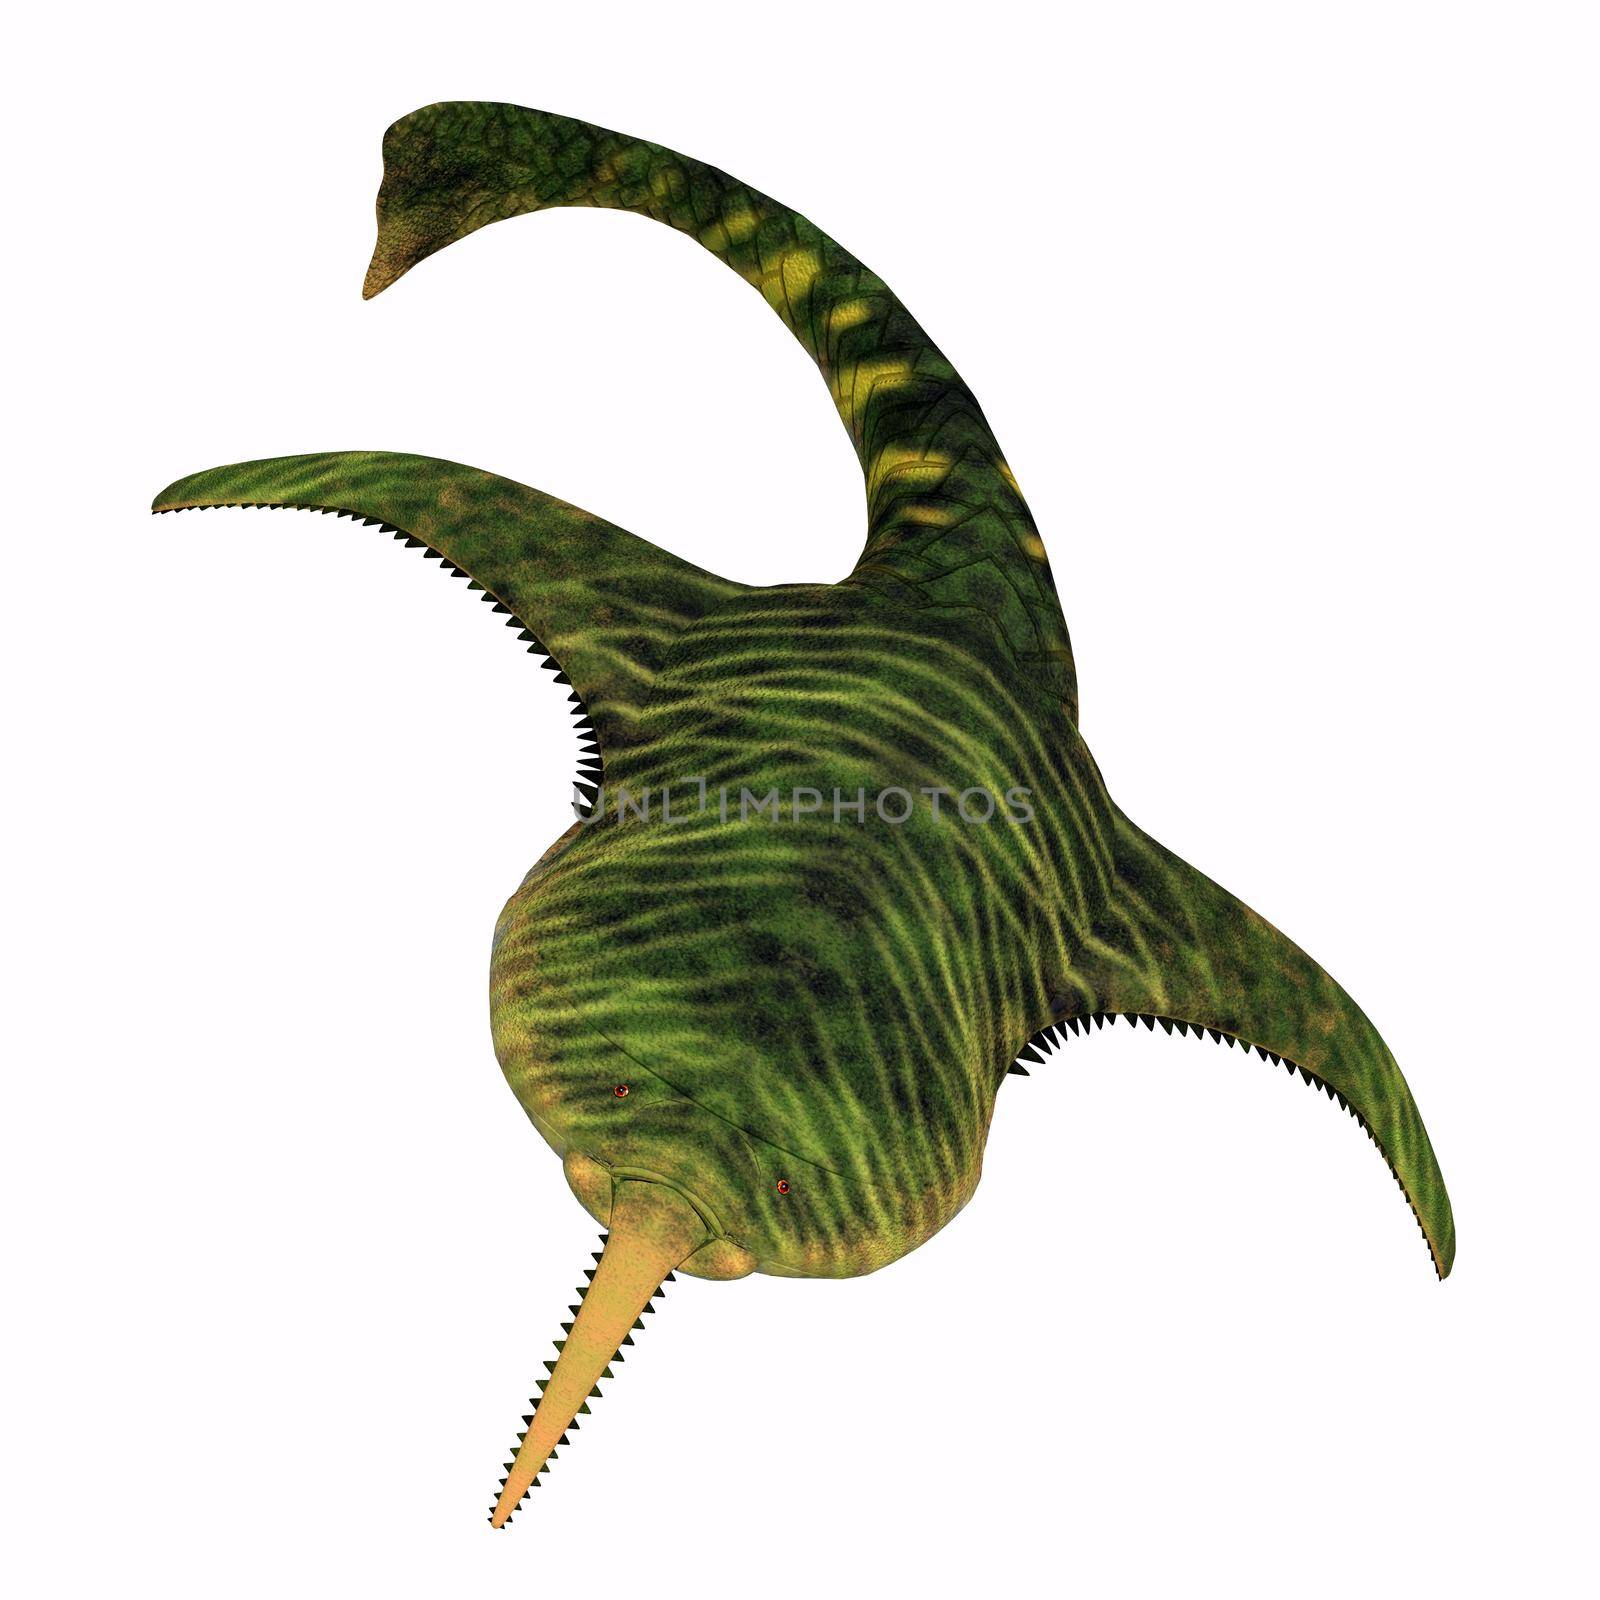 Doryaspis was a carnivorous fish that lived during the Devonian Period in the Paleozoic seas.